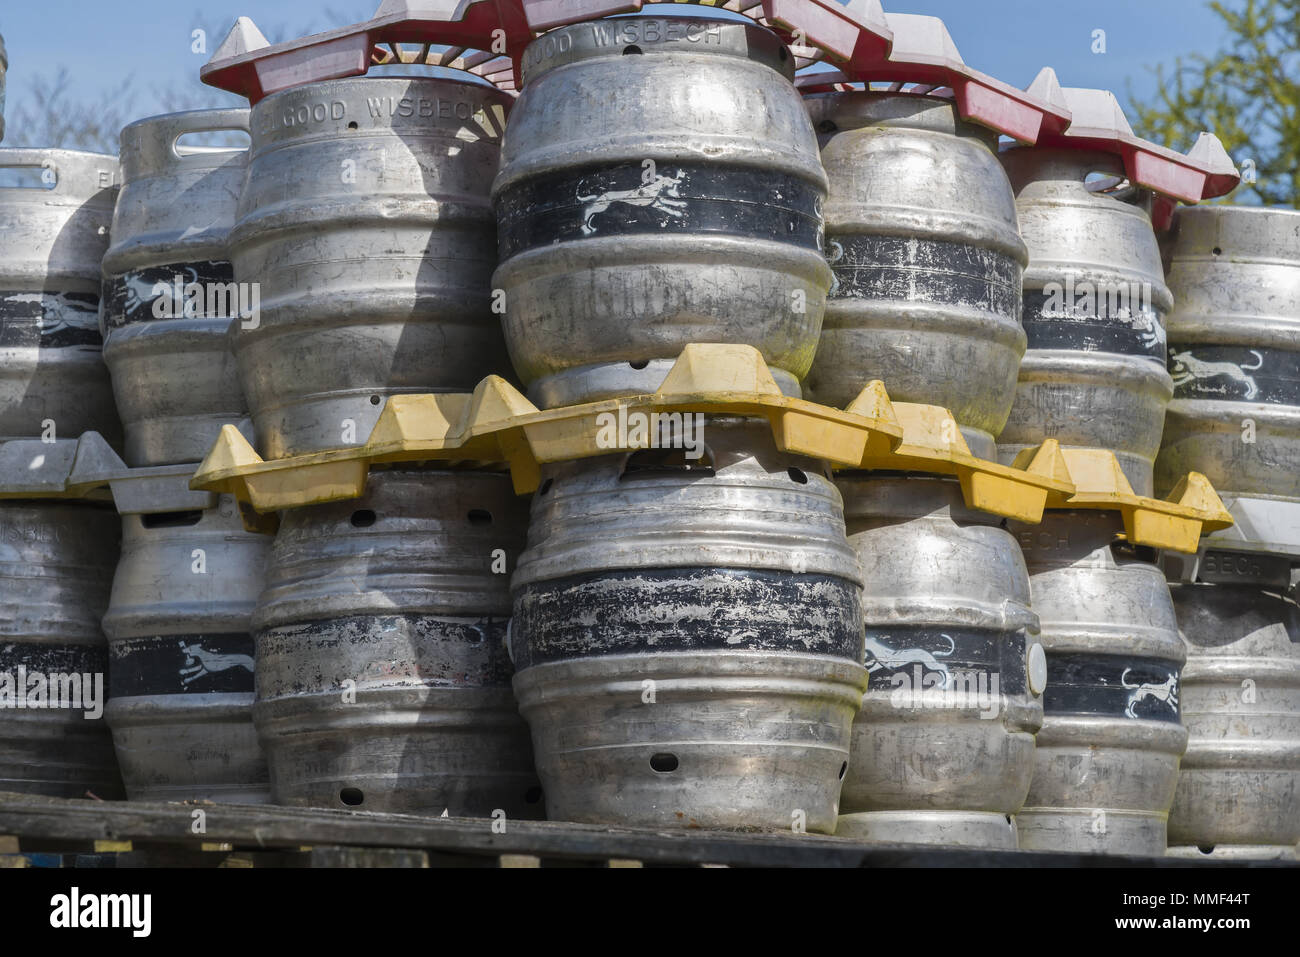 Collection of  aluminium barrels stacked up at Elgood's Brewery, Wisbech, Cambridgeshire UK. A traditional family run brewery making real ales. Stock Photo